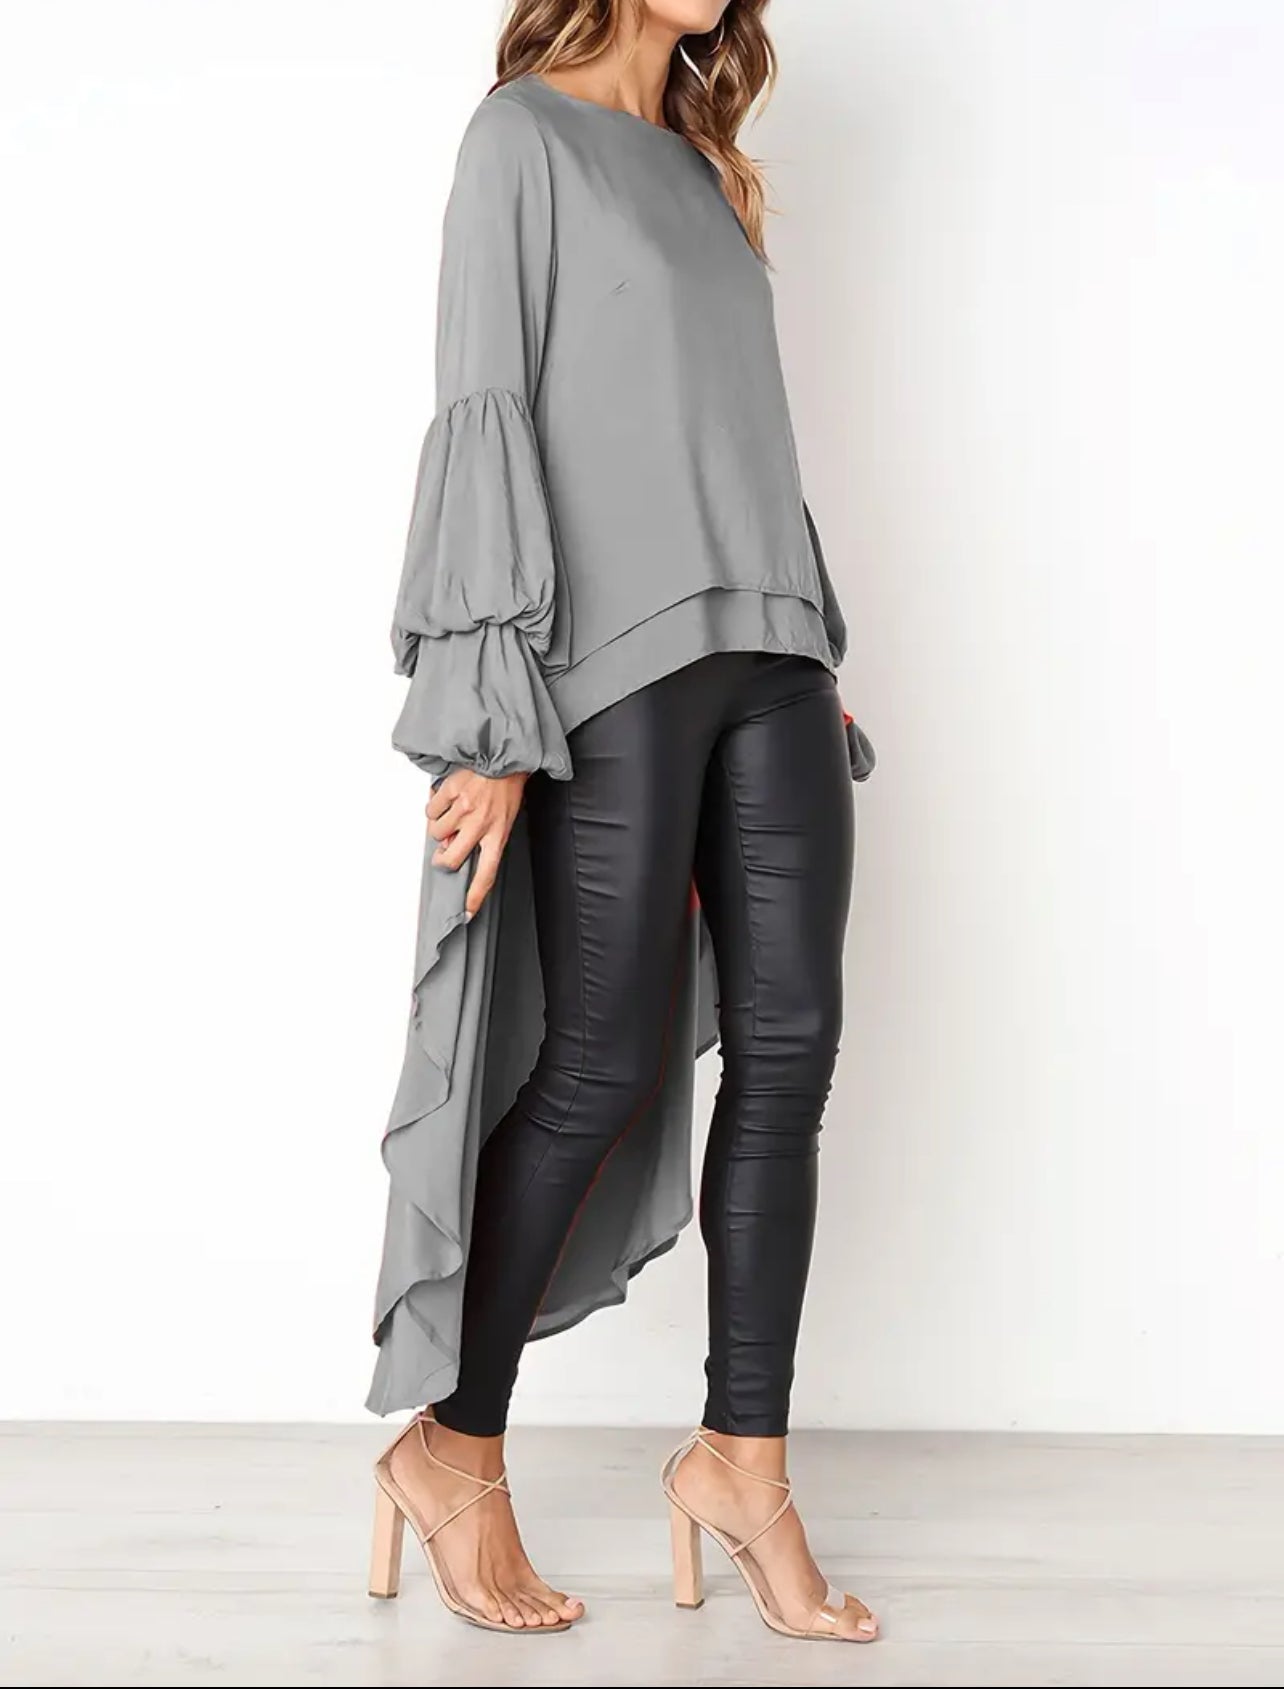 Solid Crew Neck Asymmetrical, Lantern Long Sleeve Top, Posh 💋 Mommies Collection